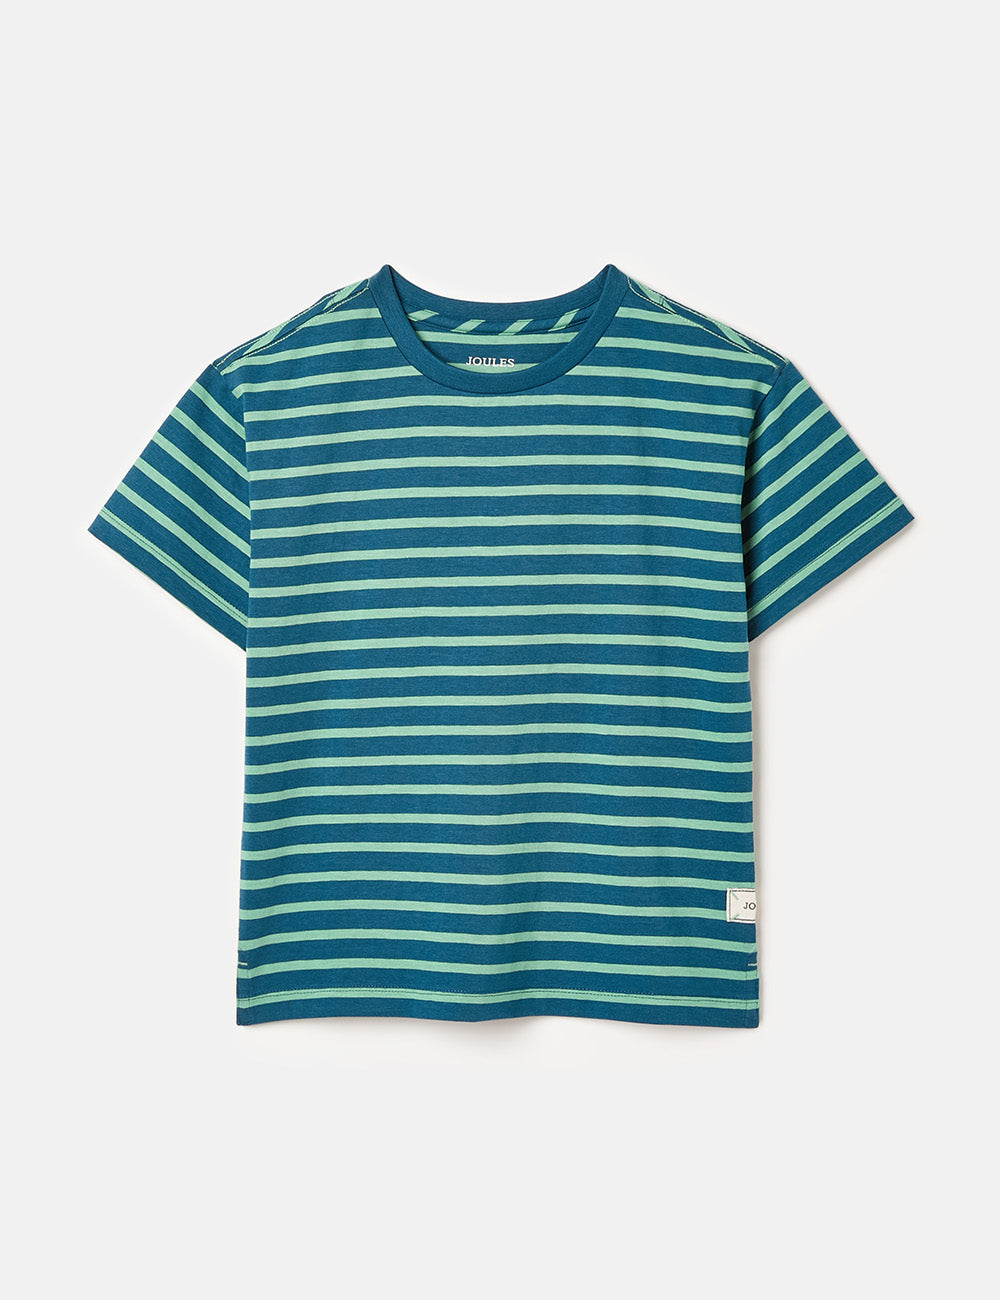 Joules Laundered Stripe T-Shirt - Teal/Navy Stripe